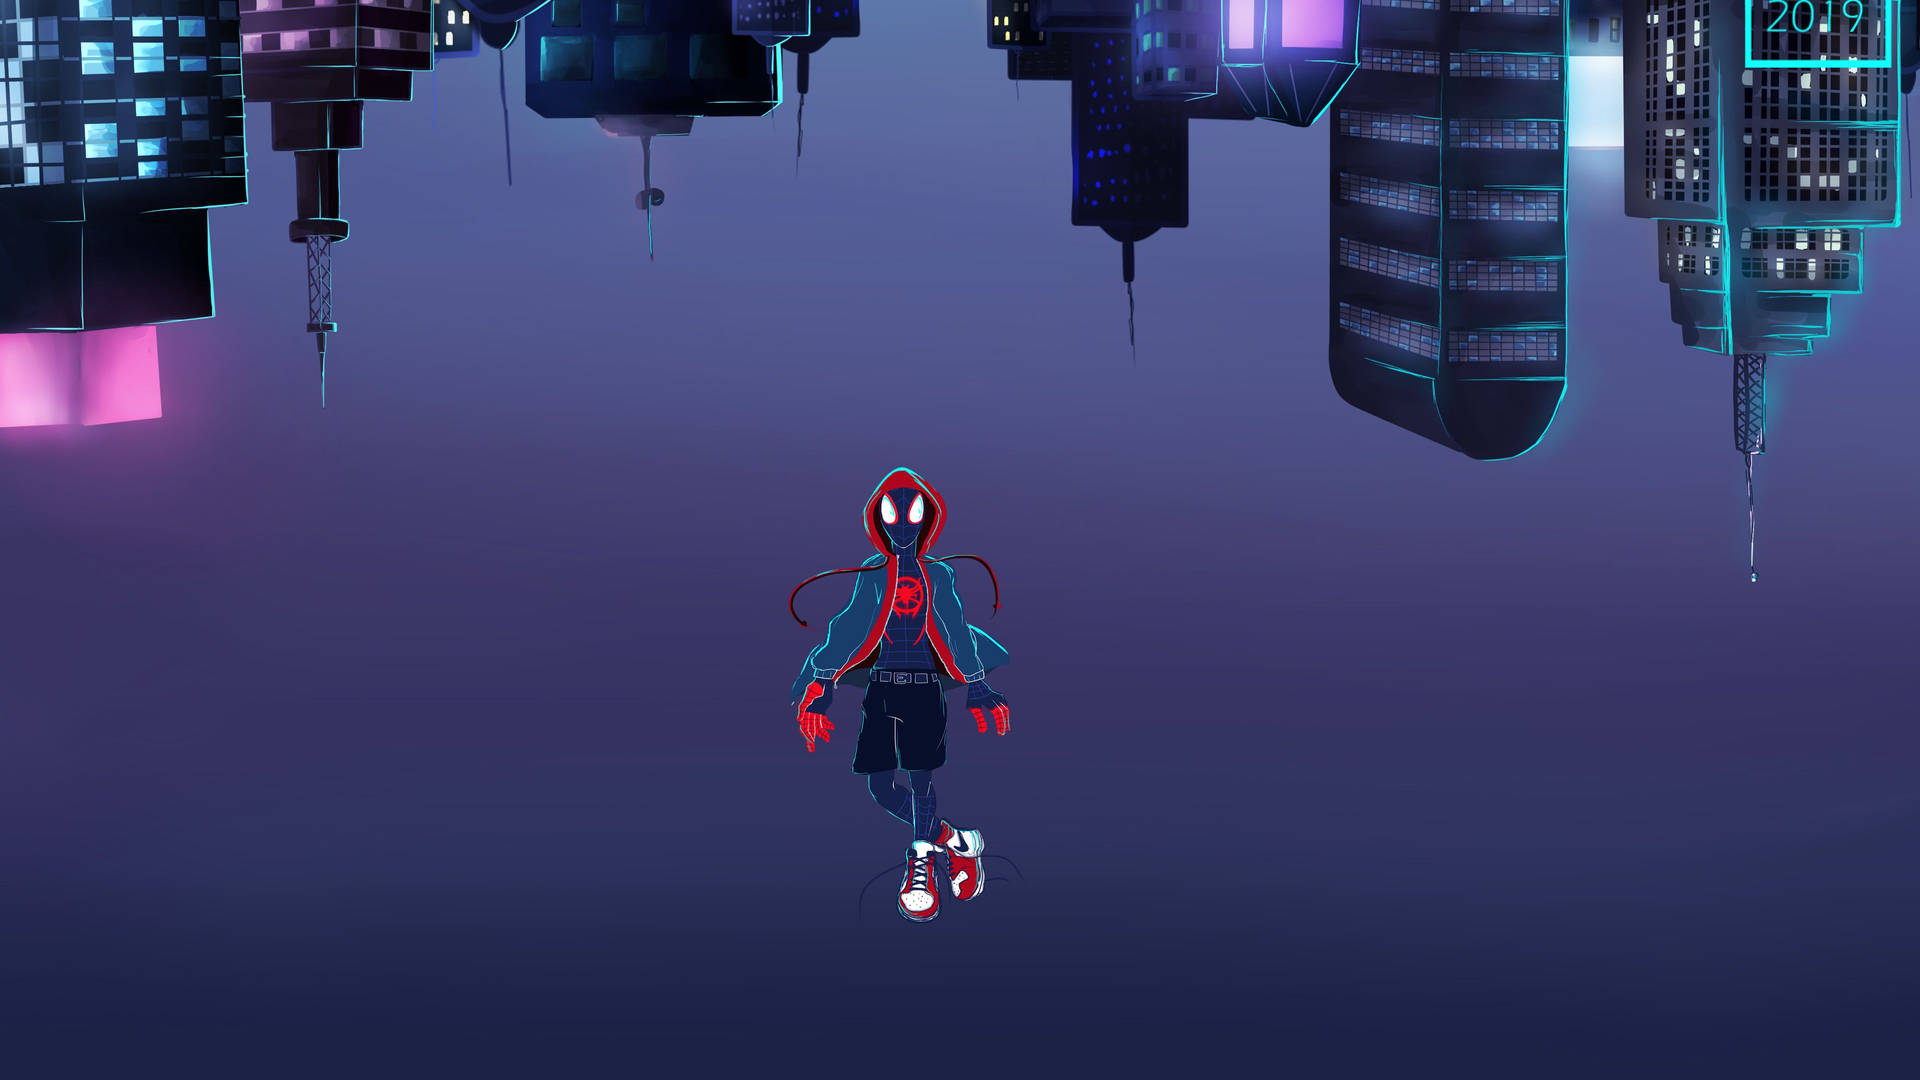 Spiderman wearing blue jacket and sneakers floating on an upside down city.